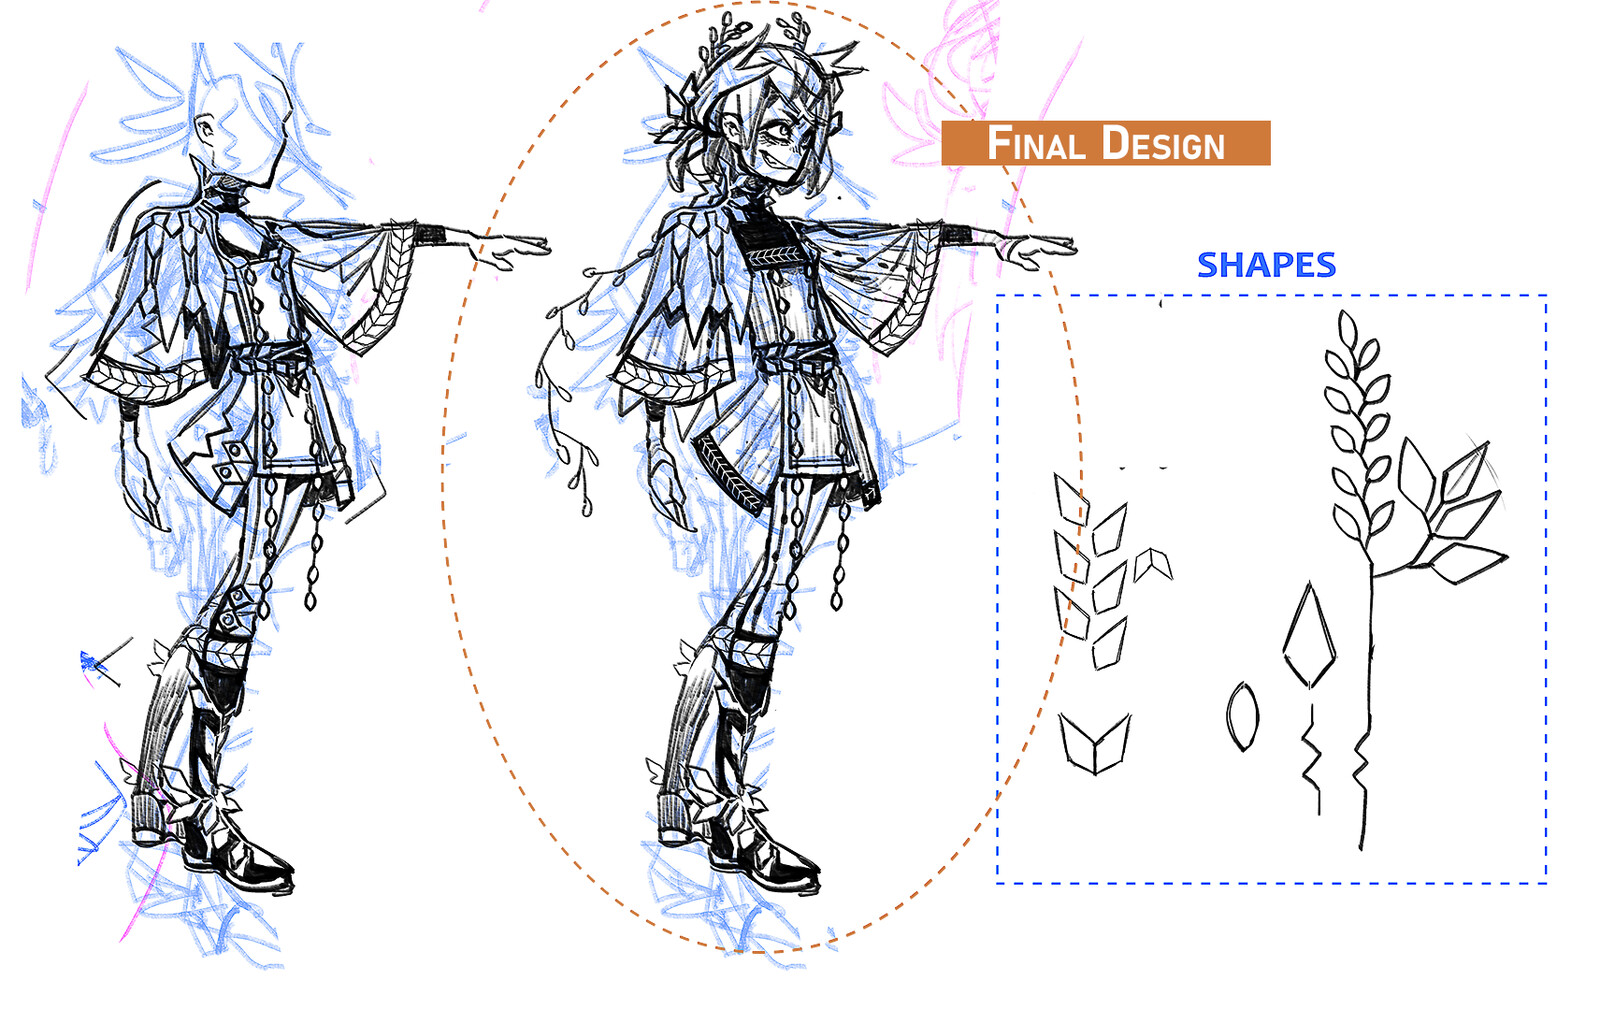 The final design in it's sketch state, and the shapes i'm allowed to use for her design.